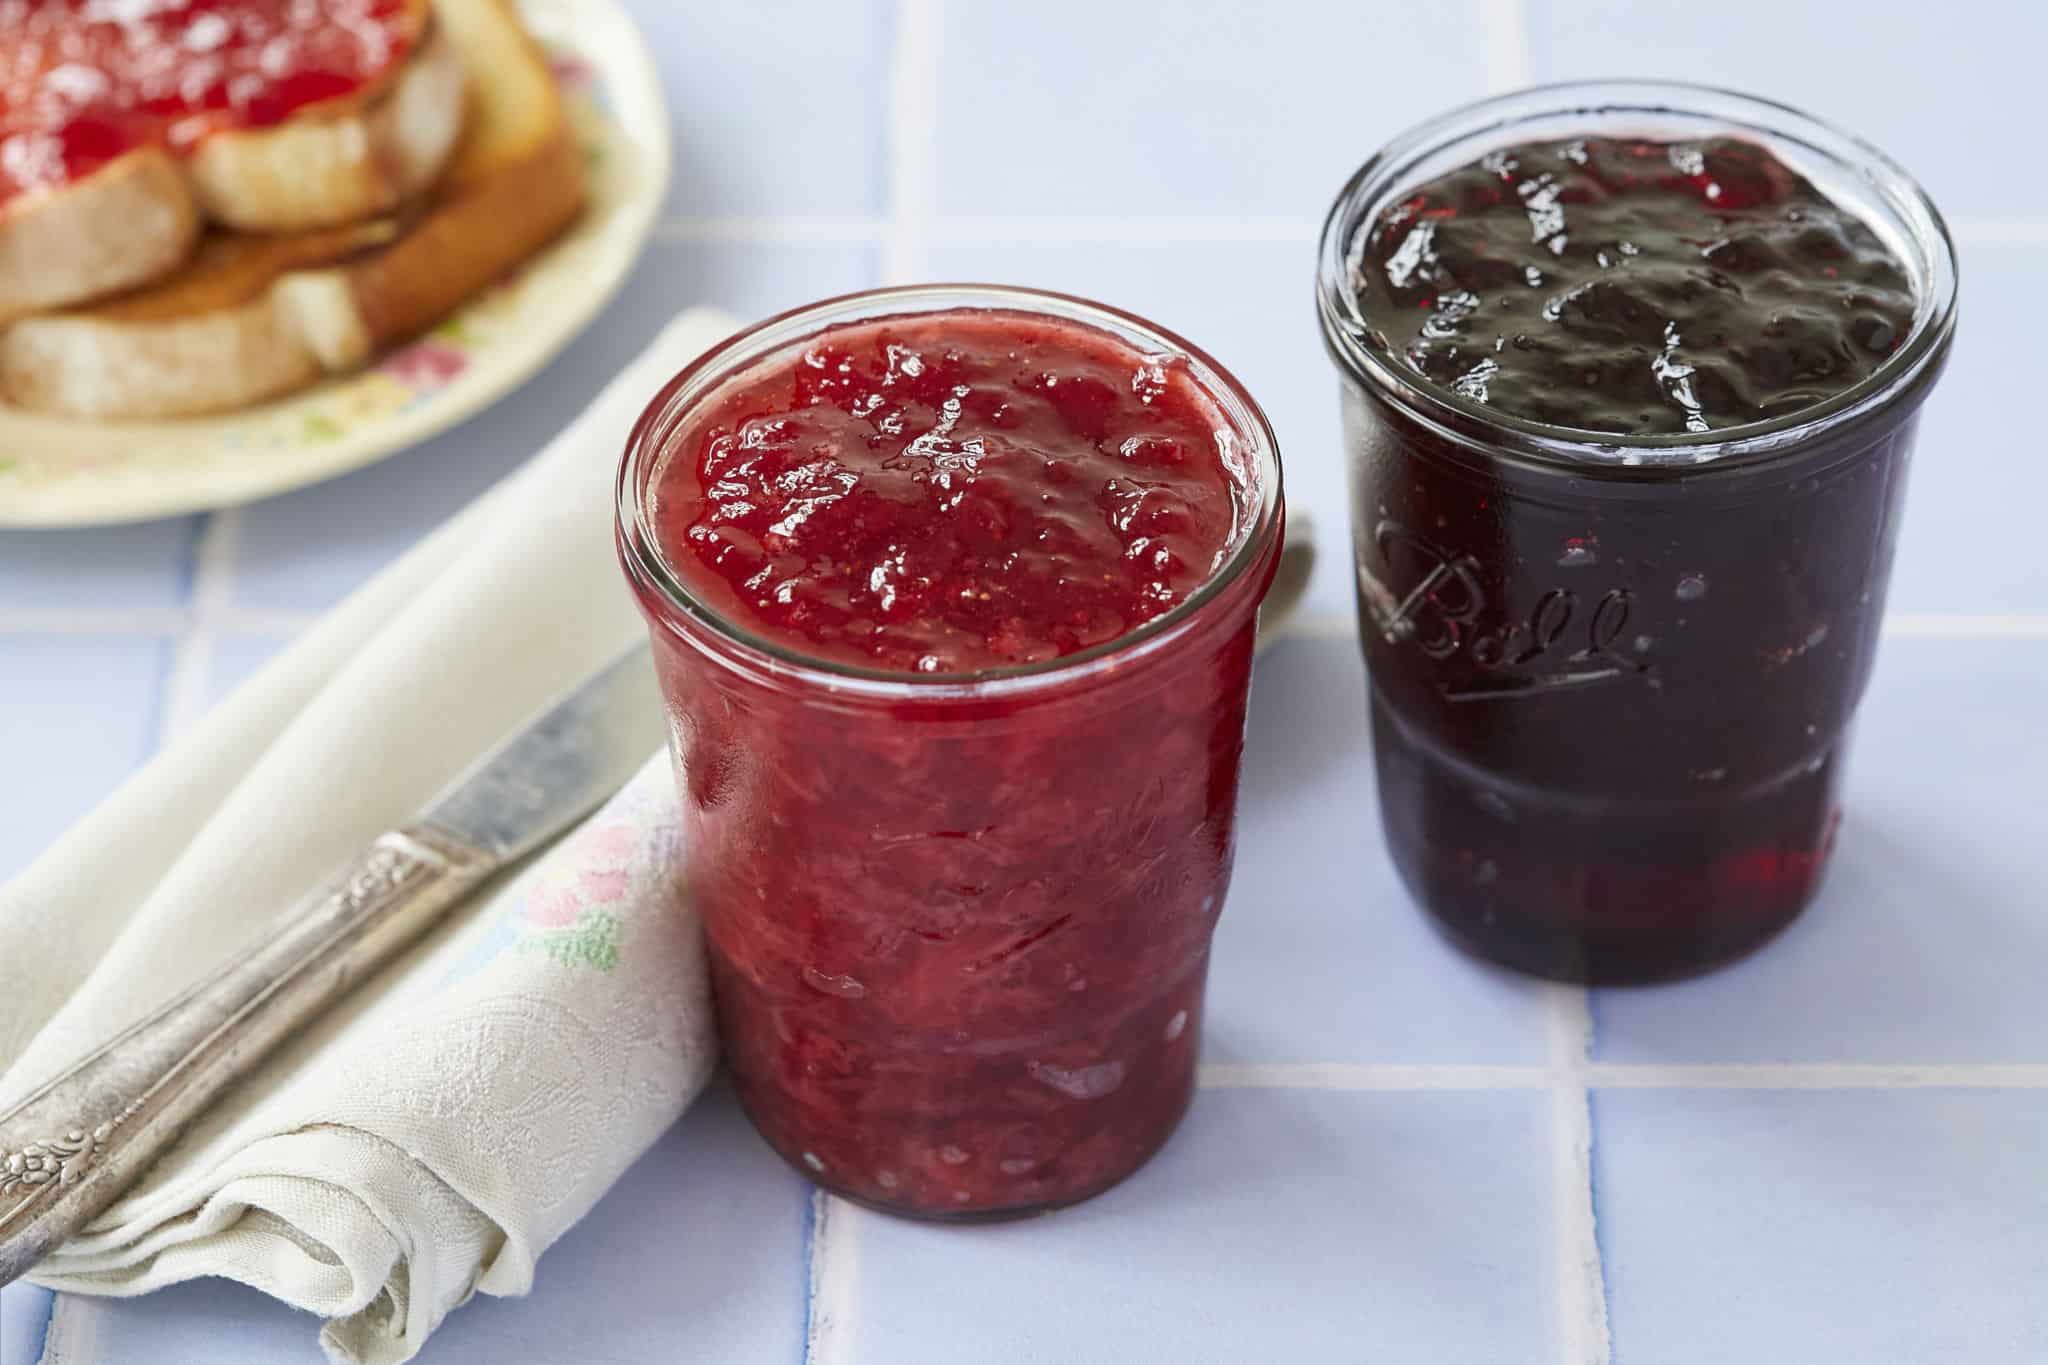 Two homemade jars of jam are displayed on a table, one red and one dark purplish. Possibly homemade raspberry or strawberry jam.